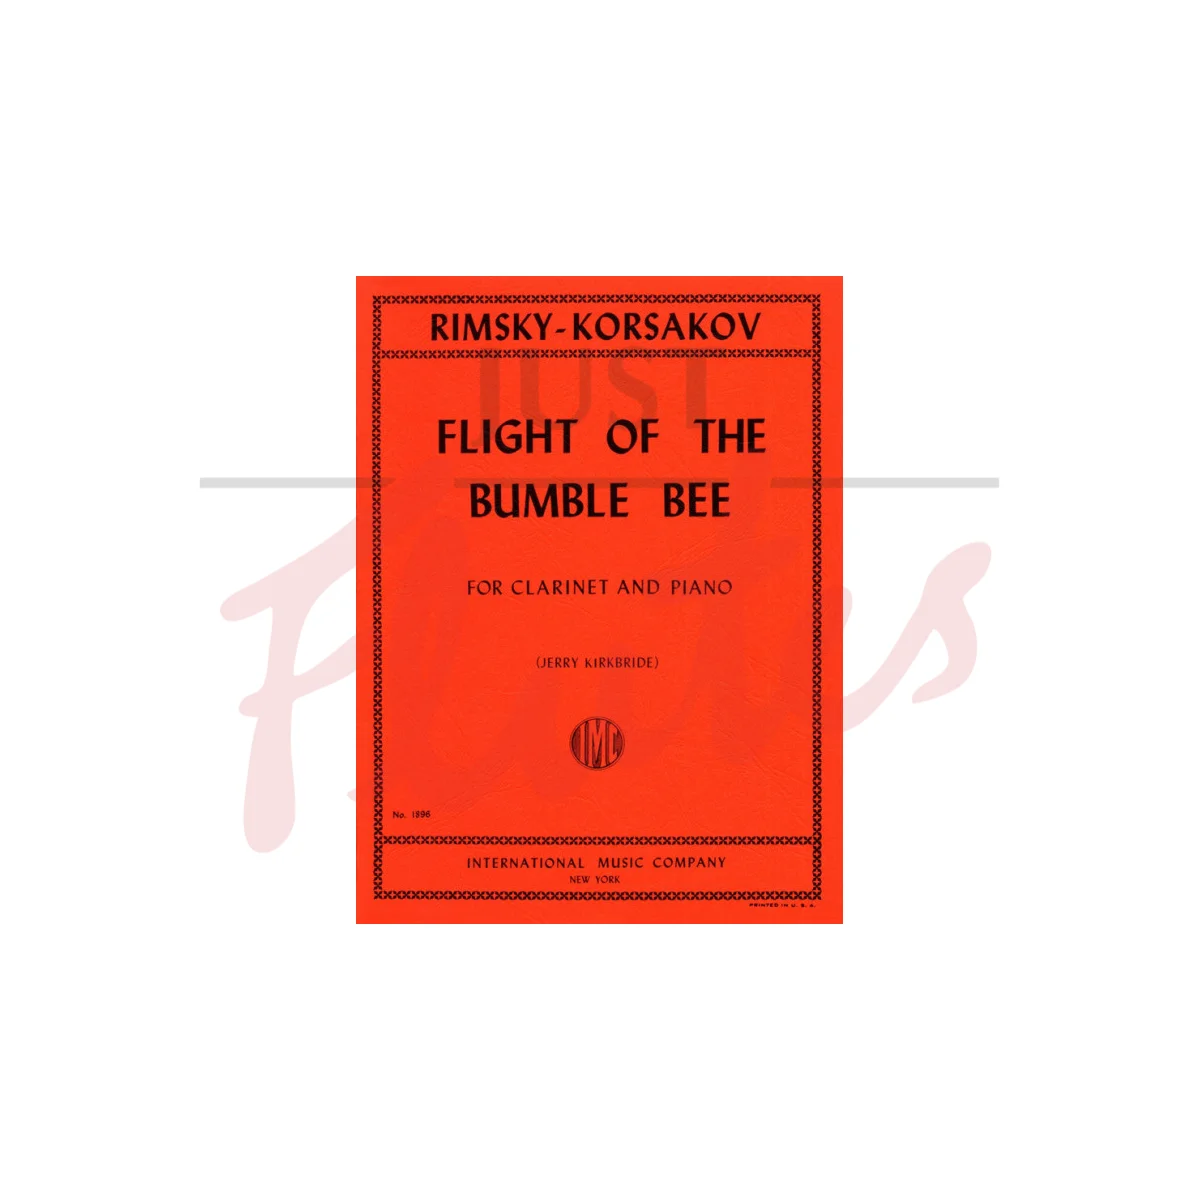 Flight of the Bumble Bee for Clarinet and Piano